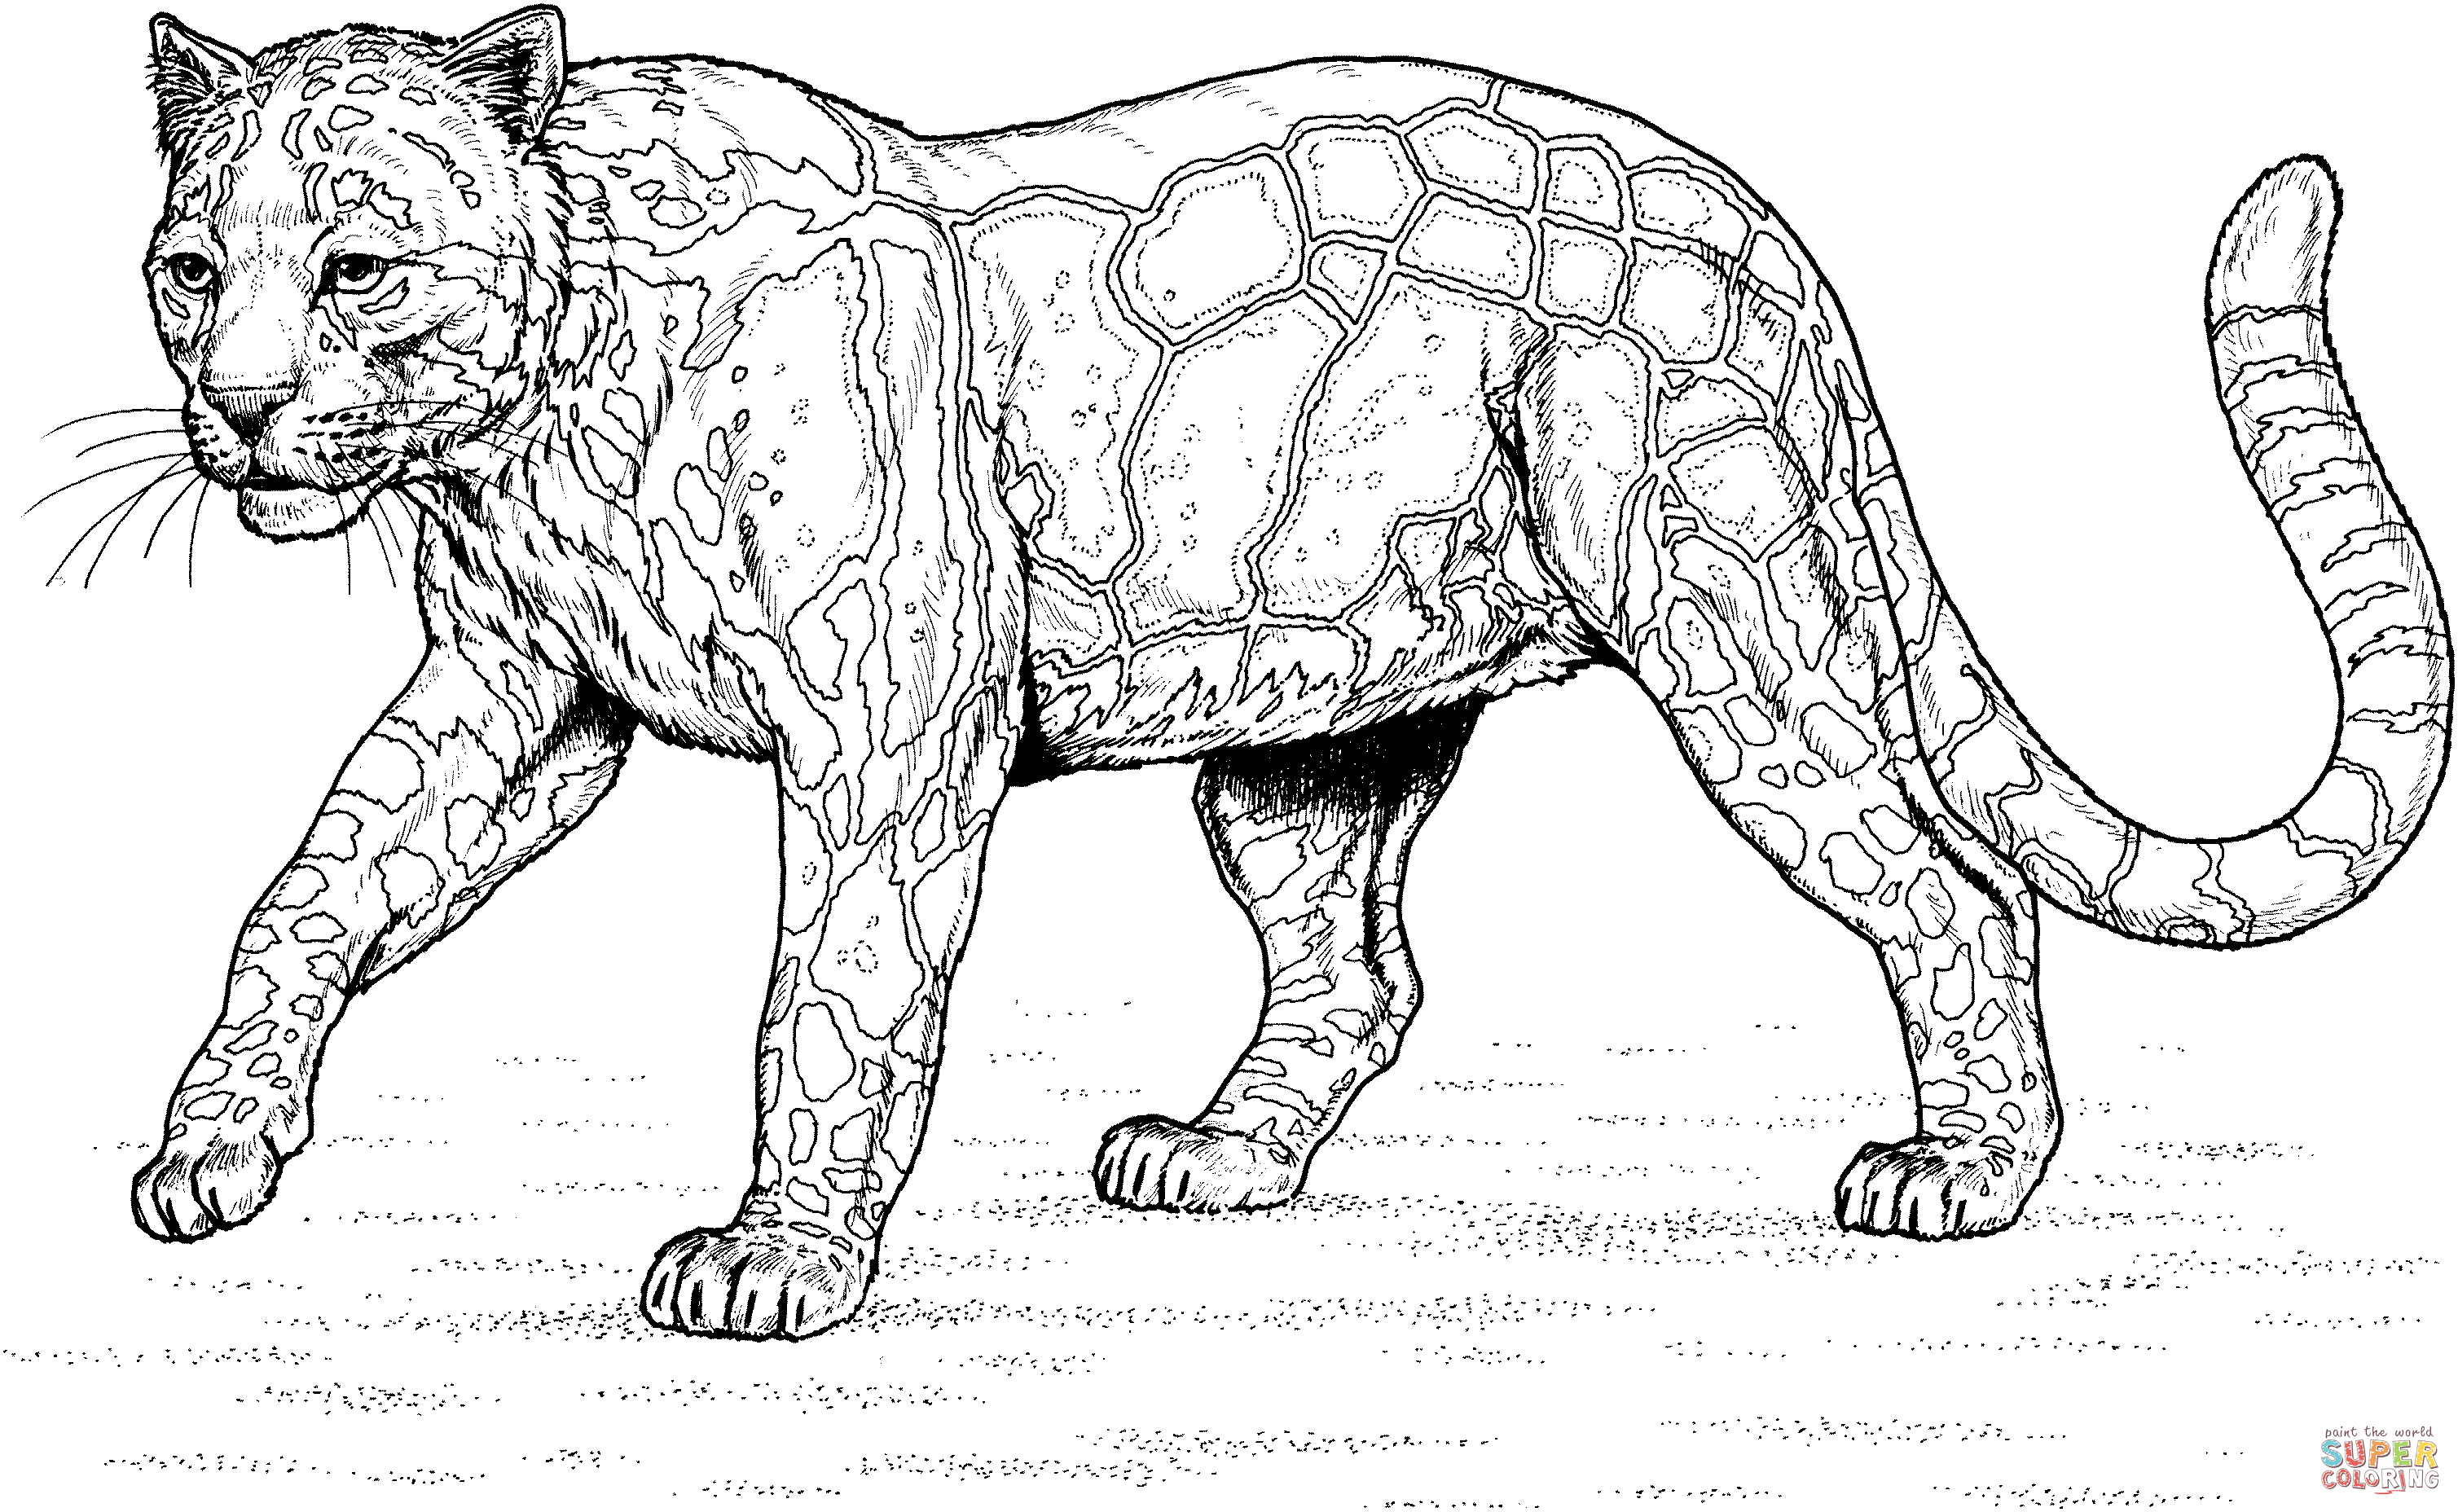 Walking Clouded Leopard coloring page | Free Printable Coloring Pages